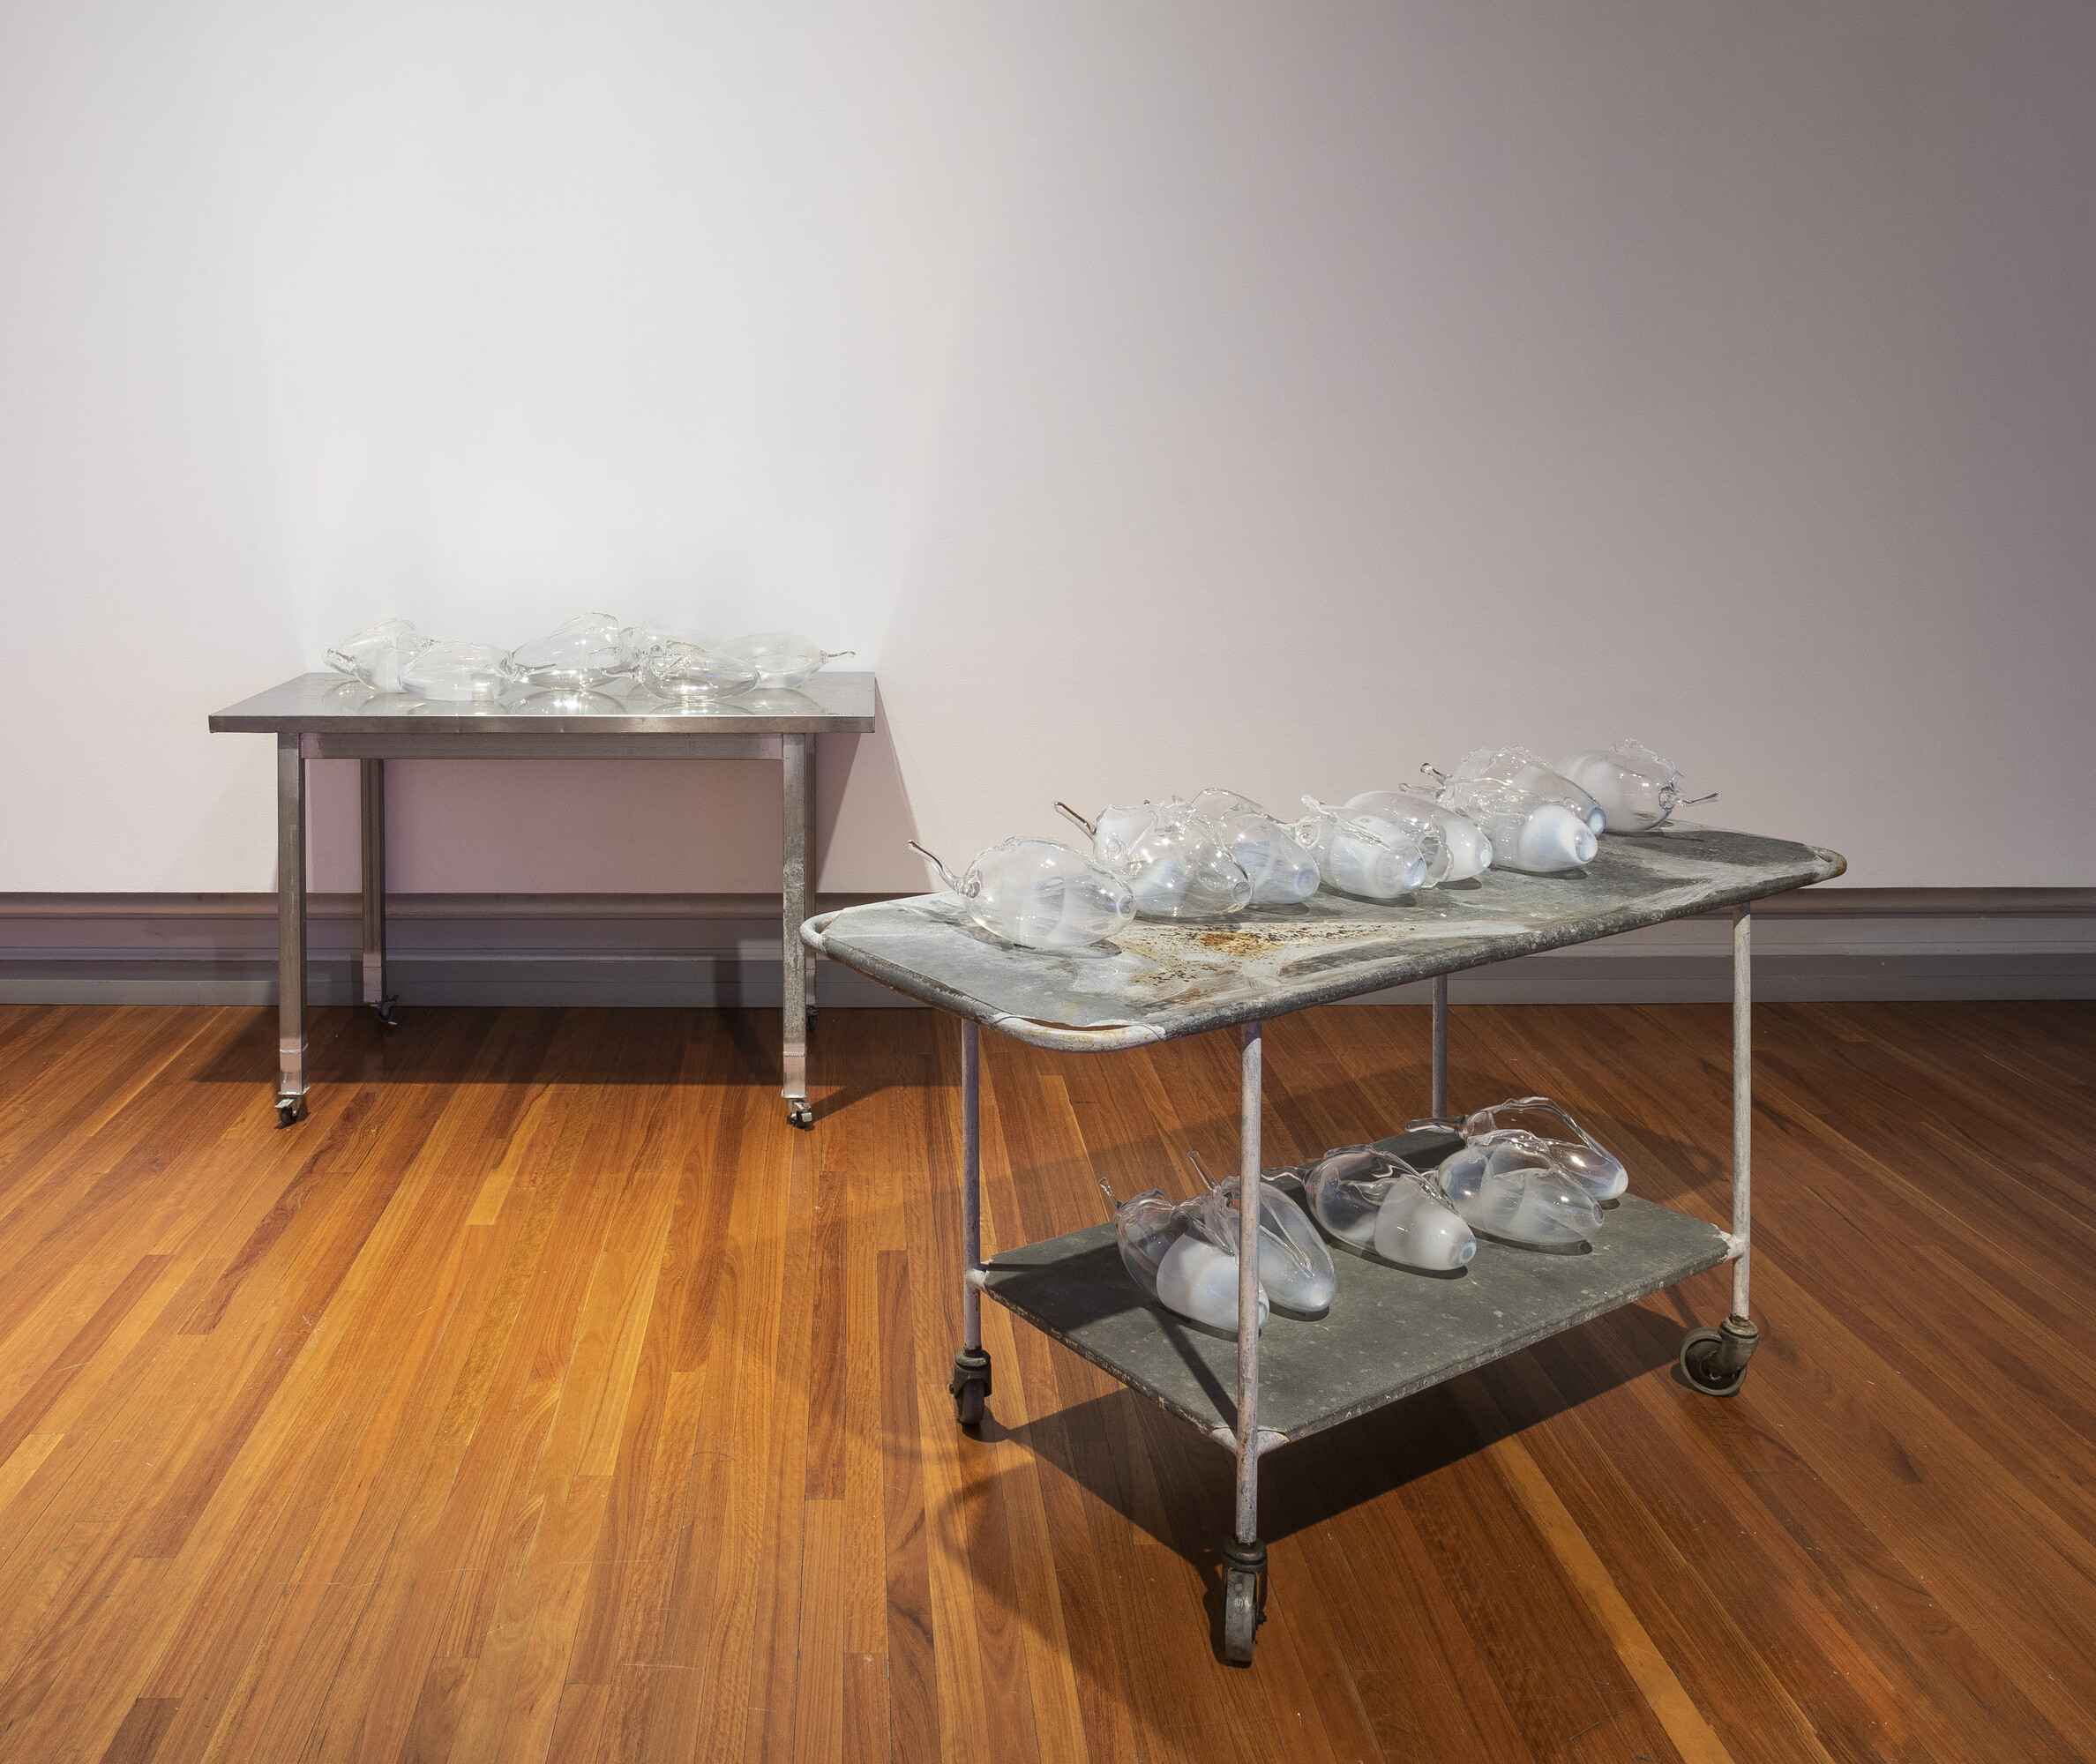 Yhonnie Scarce, <em>In the dead house</em>, 2020. Blown glass bush bananas and vintage mortuary table. Image courtesy of RMIT Gallery. Photo: Tobias Titz